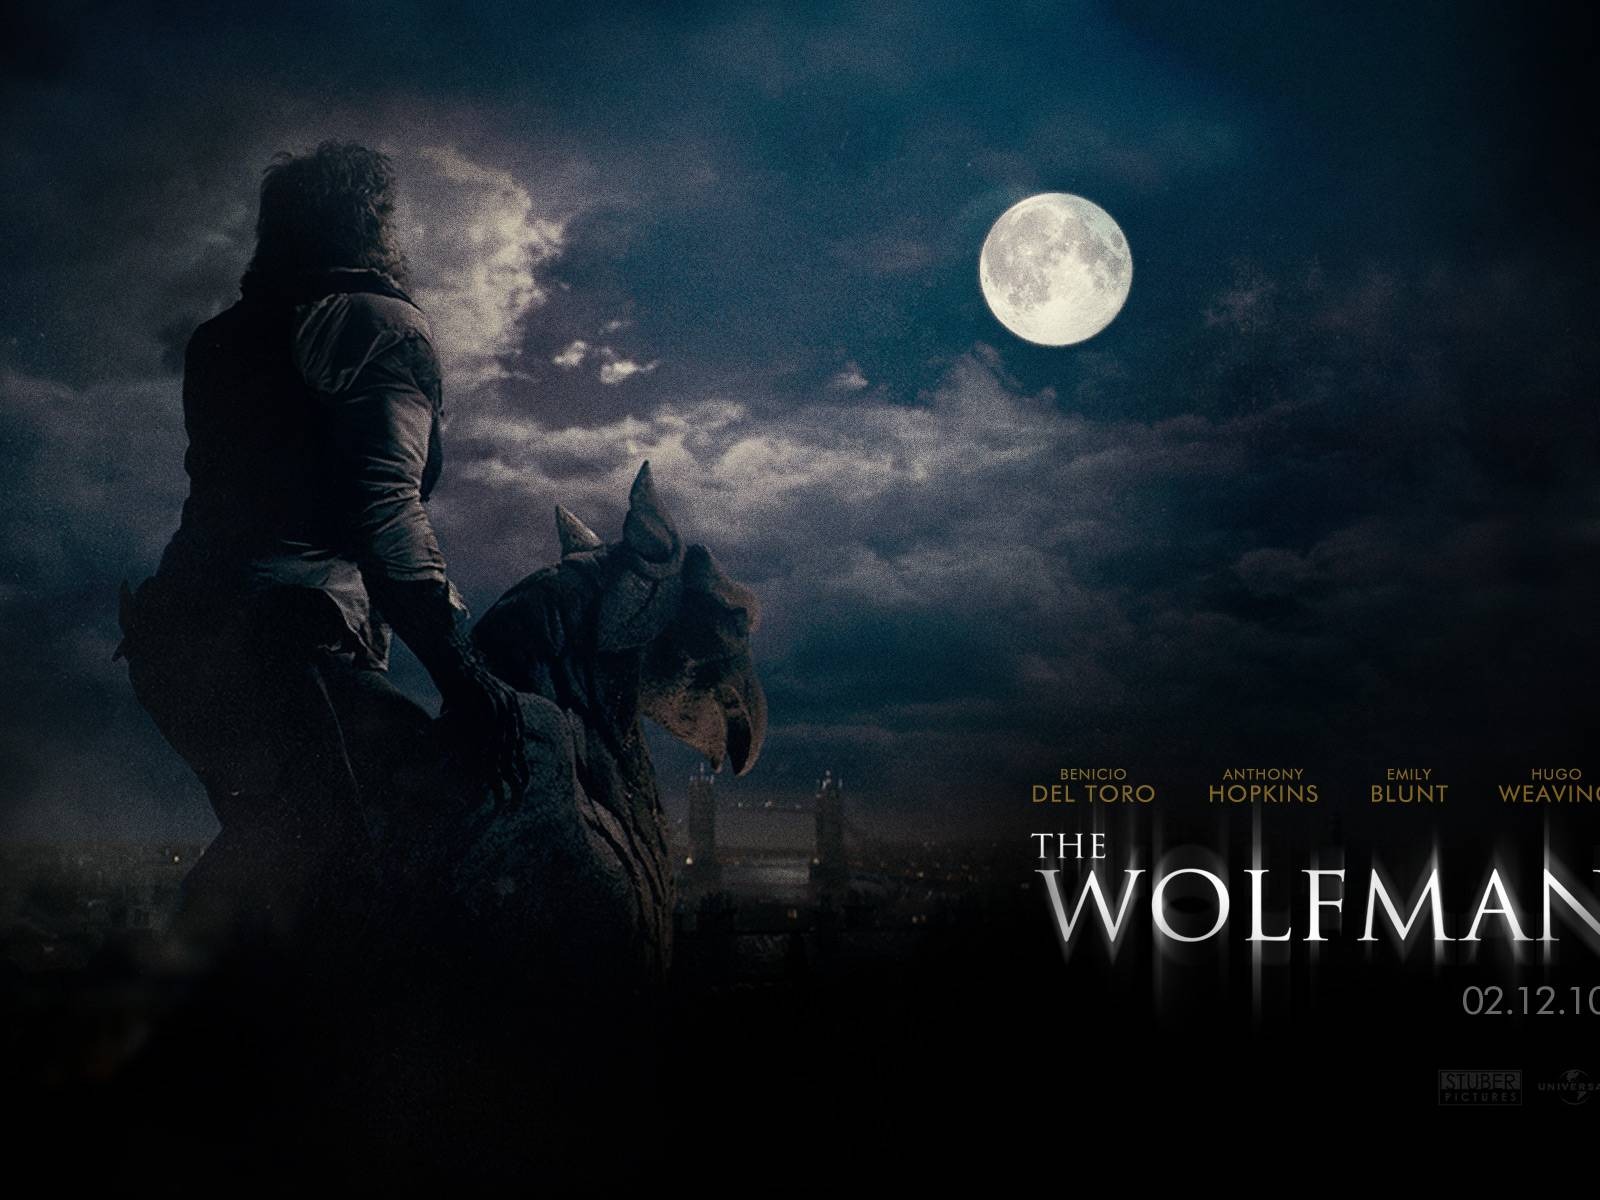 The Wolfman Movie Wallpapers #4 - 1600x1200